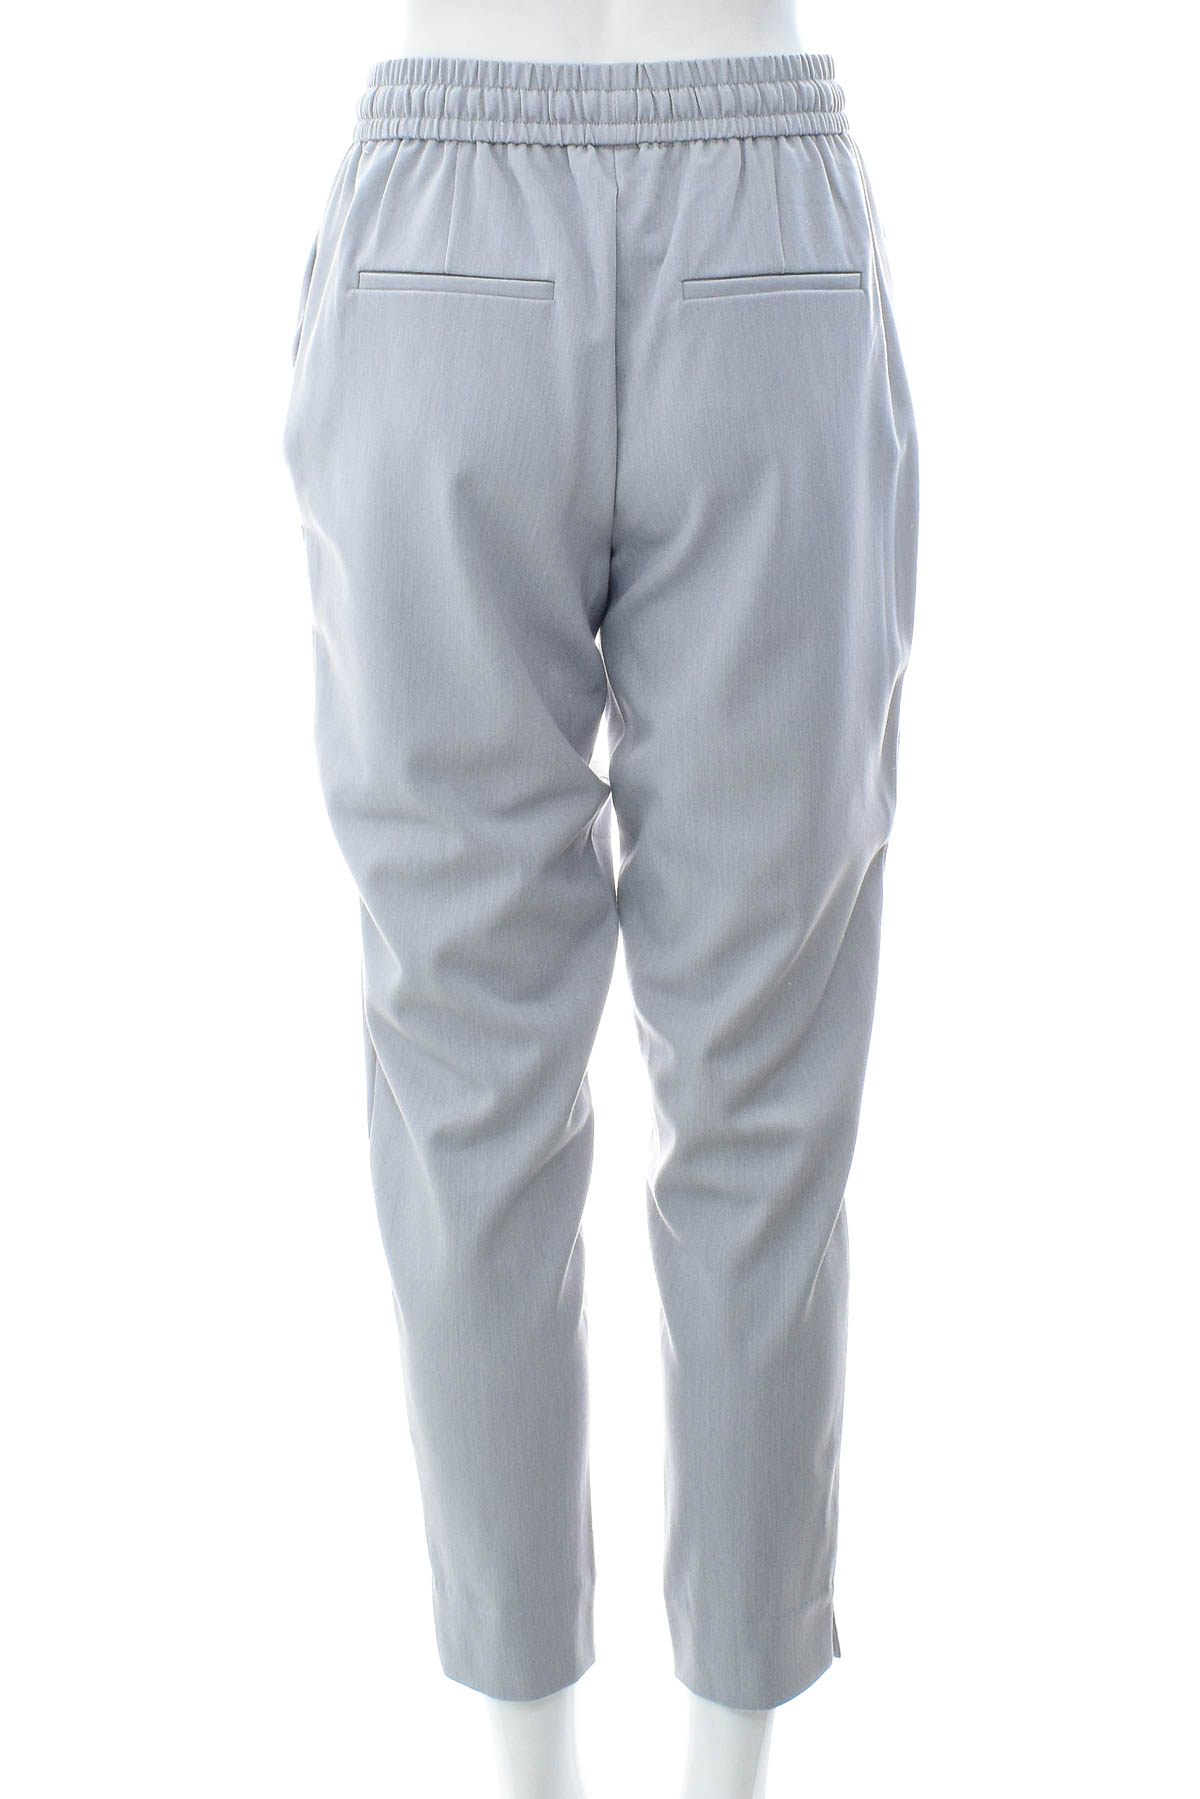 Women's trousers - RESERVED - 1